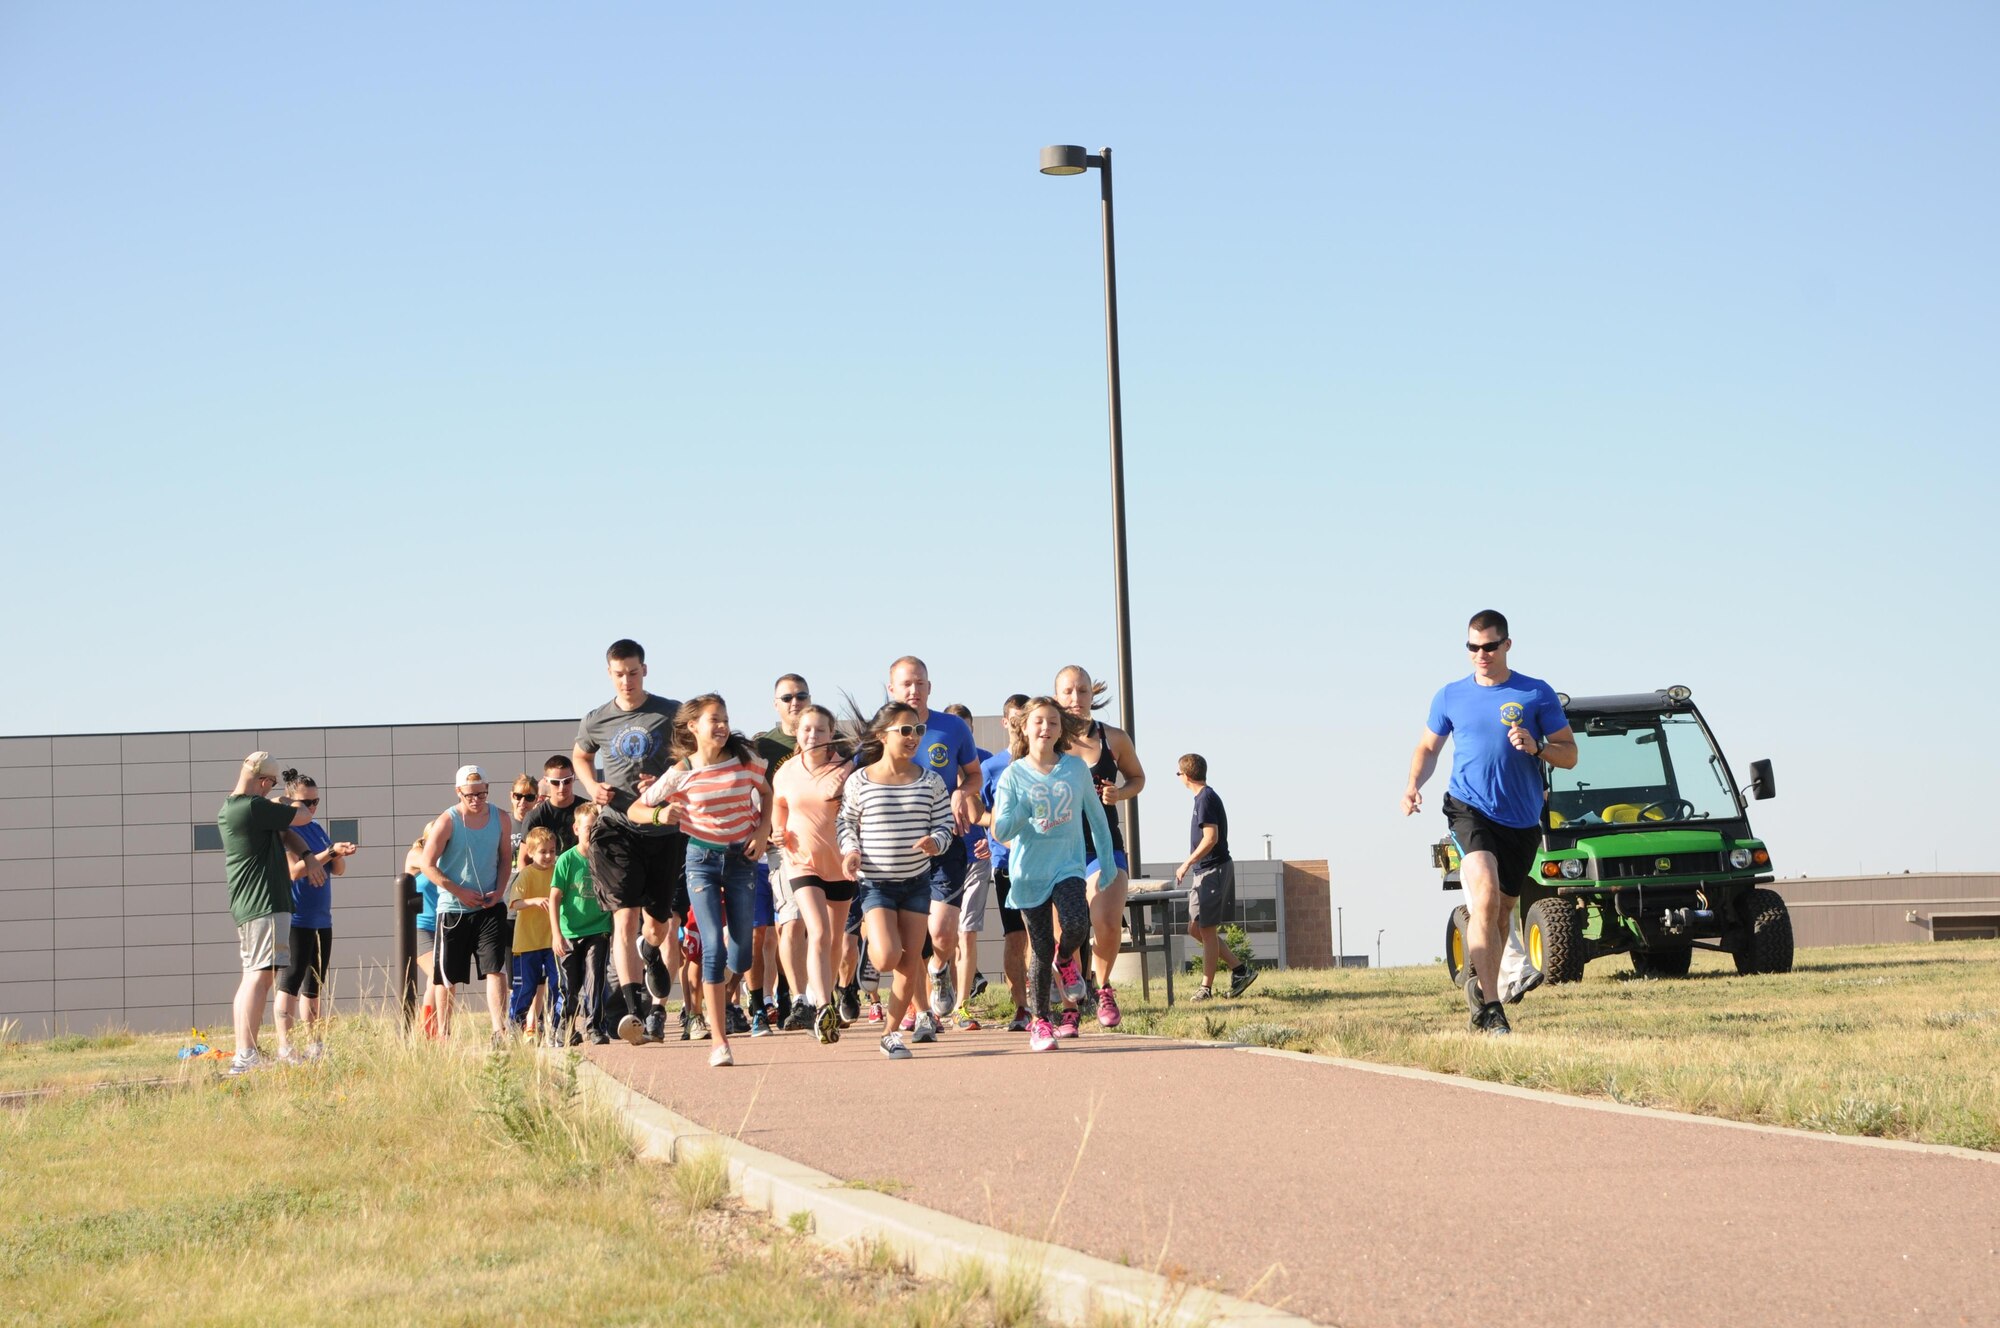 Schriever Airmen and families begin a fun run during the Summer Slam Base Picnic at Schriever Air Force Base, Colorado, Friday, July 15, 2016. The run kicked off the day’s festivities. (U.S. Air Force photo/Airman William Tracy)